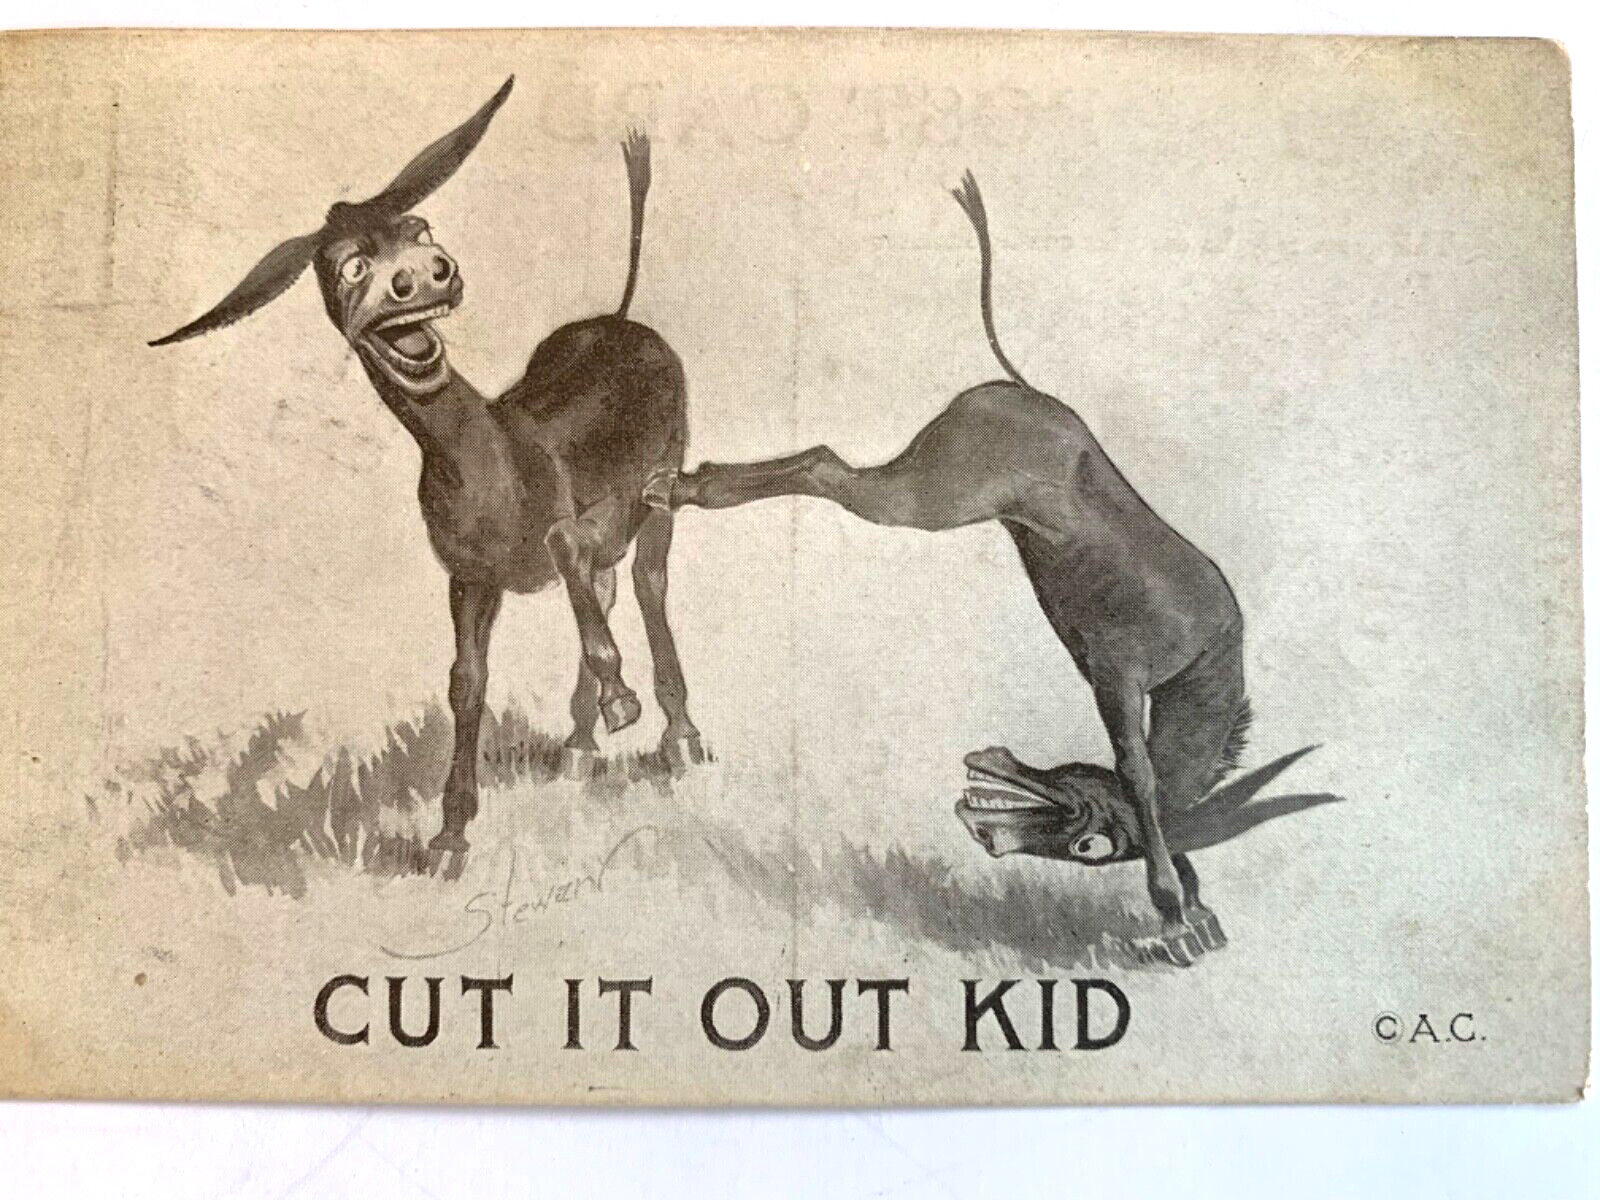 Donkey Postcard 1911 Cut It Out Kid Series HJB Humor Antique CAC Postmark Stamp